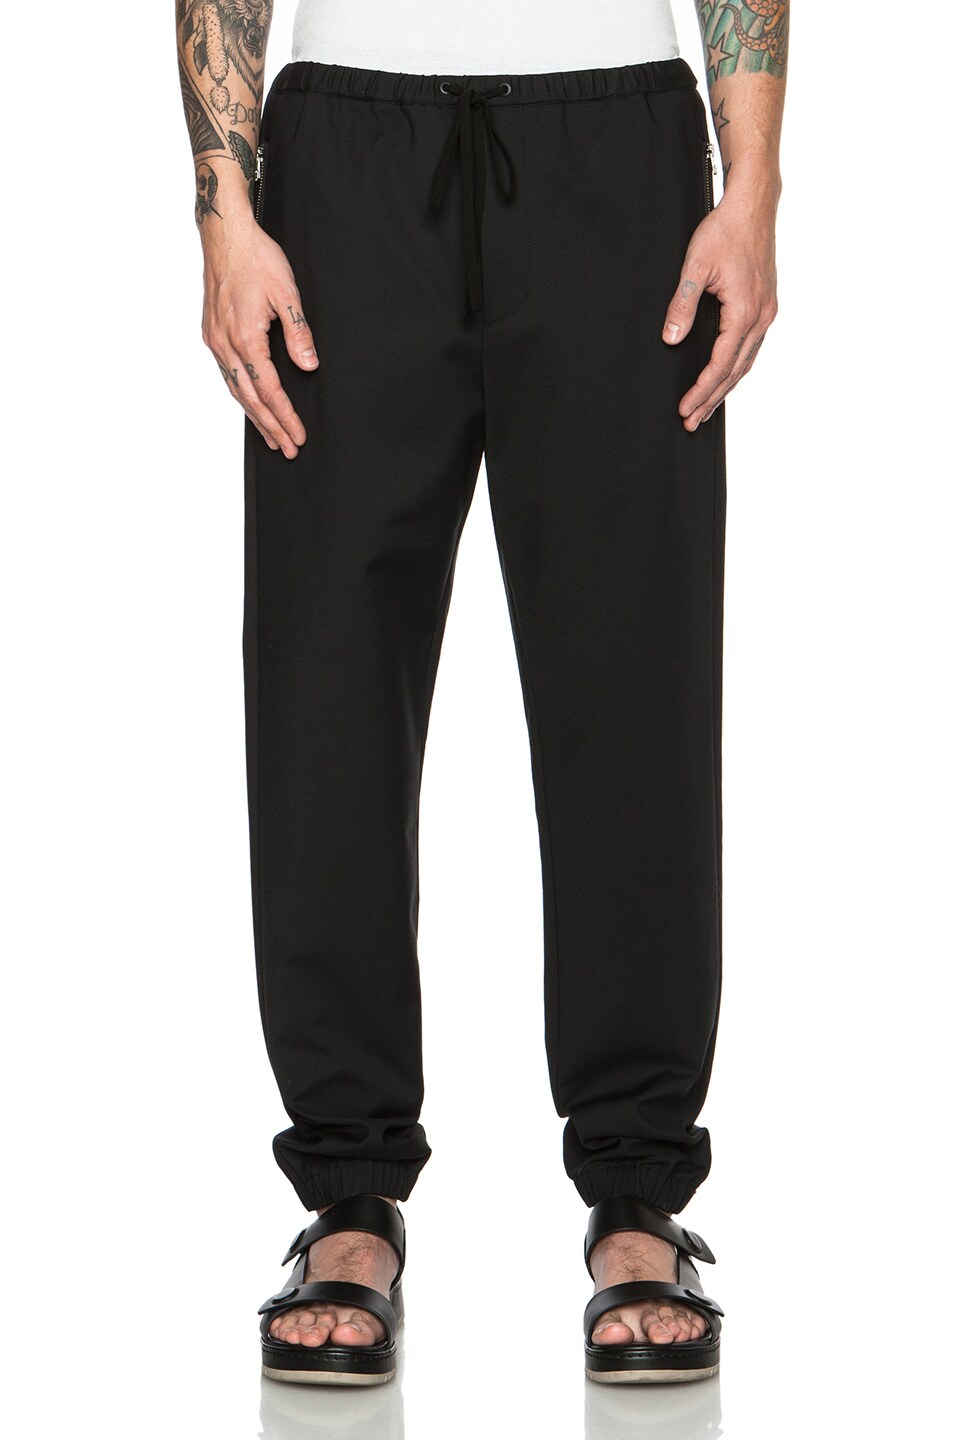 Image 1 of 3.1 phillip lim Utility Cotton-Blend Pants with Side Zipper in Black